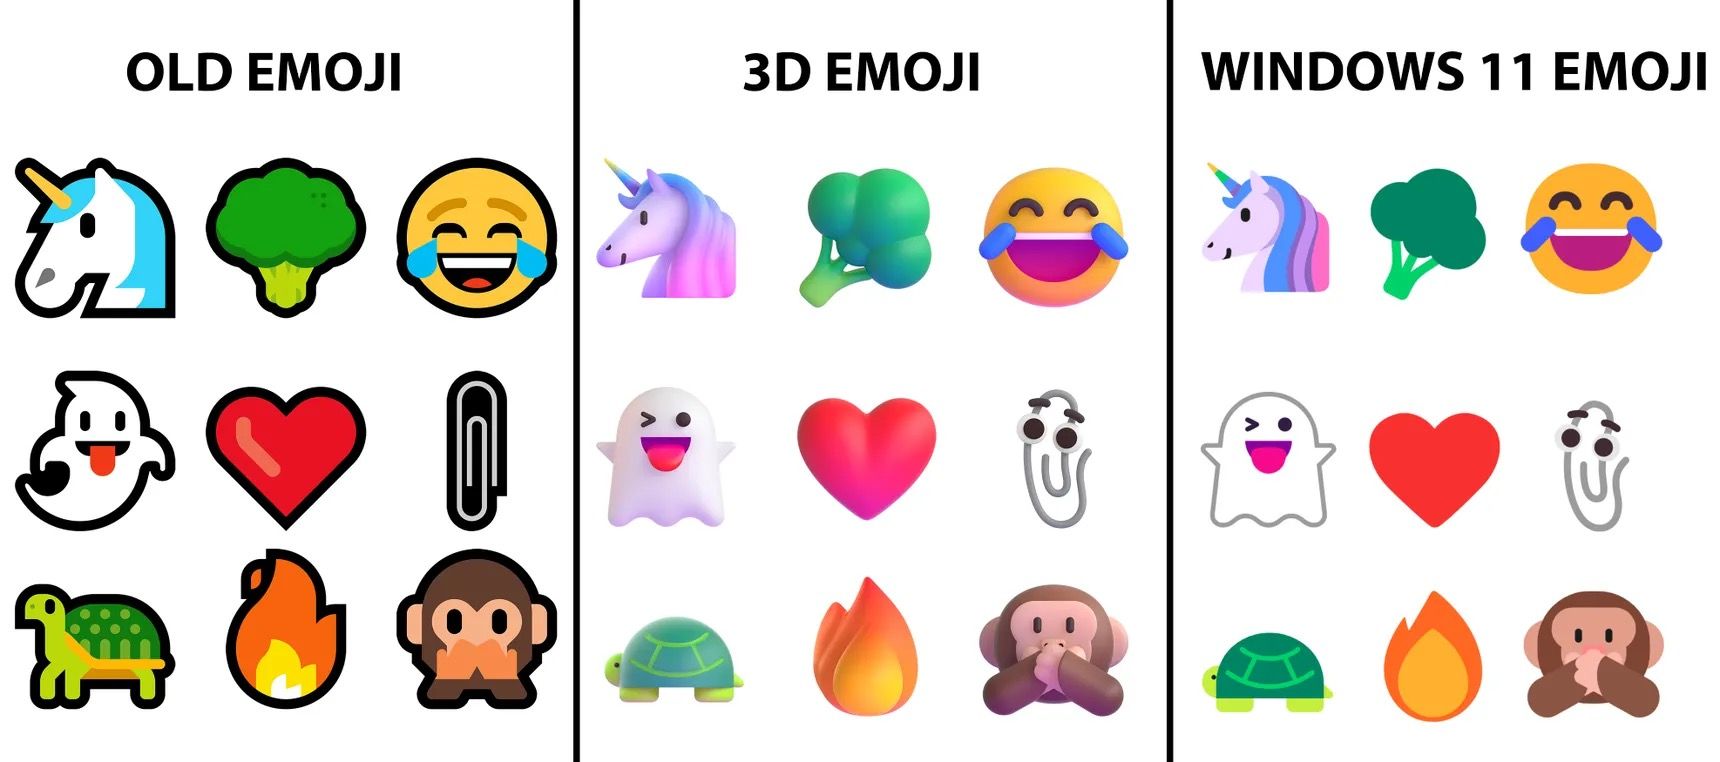 Microsoft's Walk Back on 3D Emoji is Just More of the Same (marketing assets vs the actual UI)